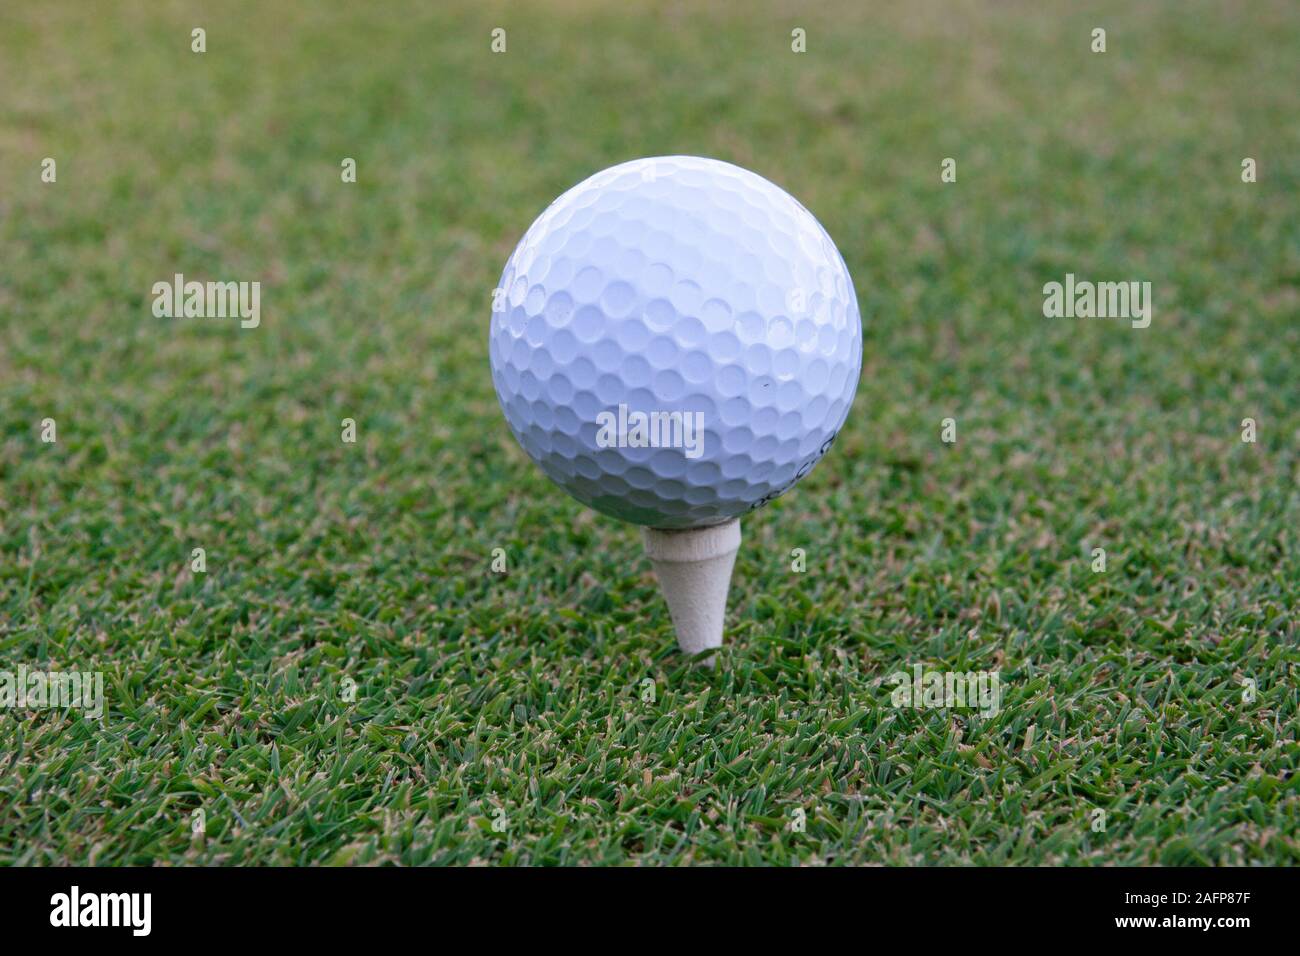 golf ball on tee pegs ready to play in the golf course Stock Photo